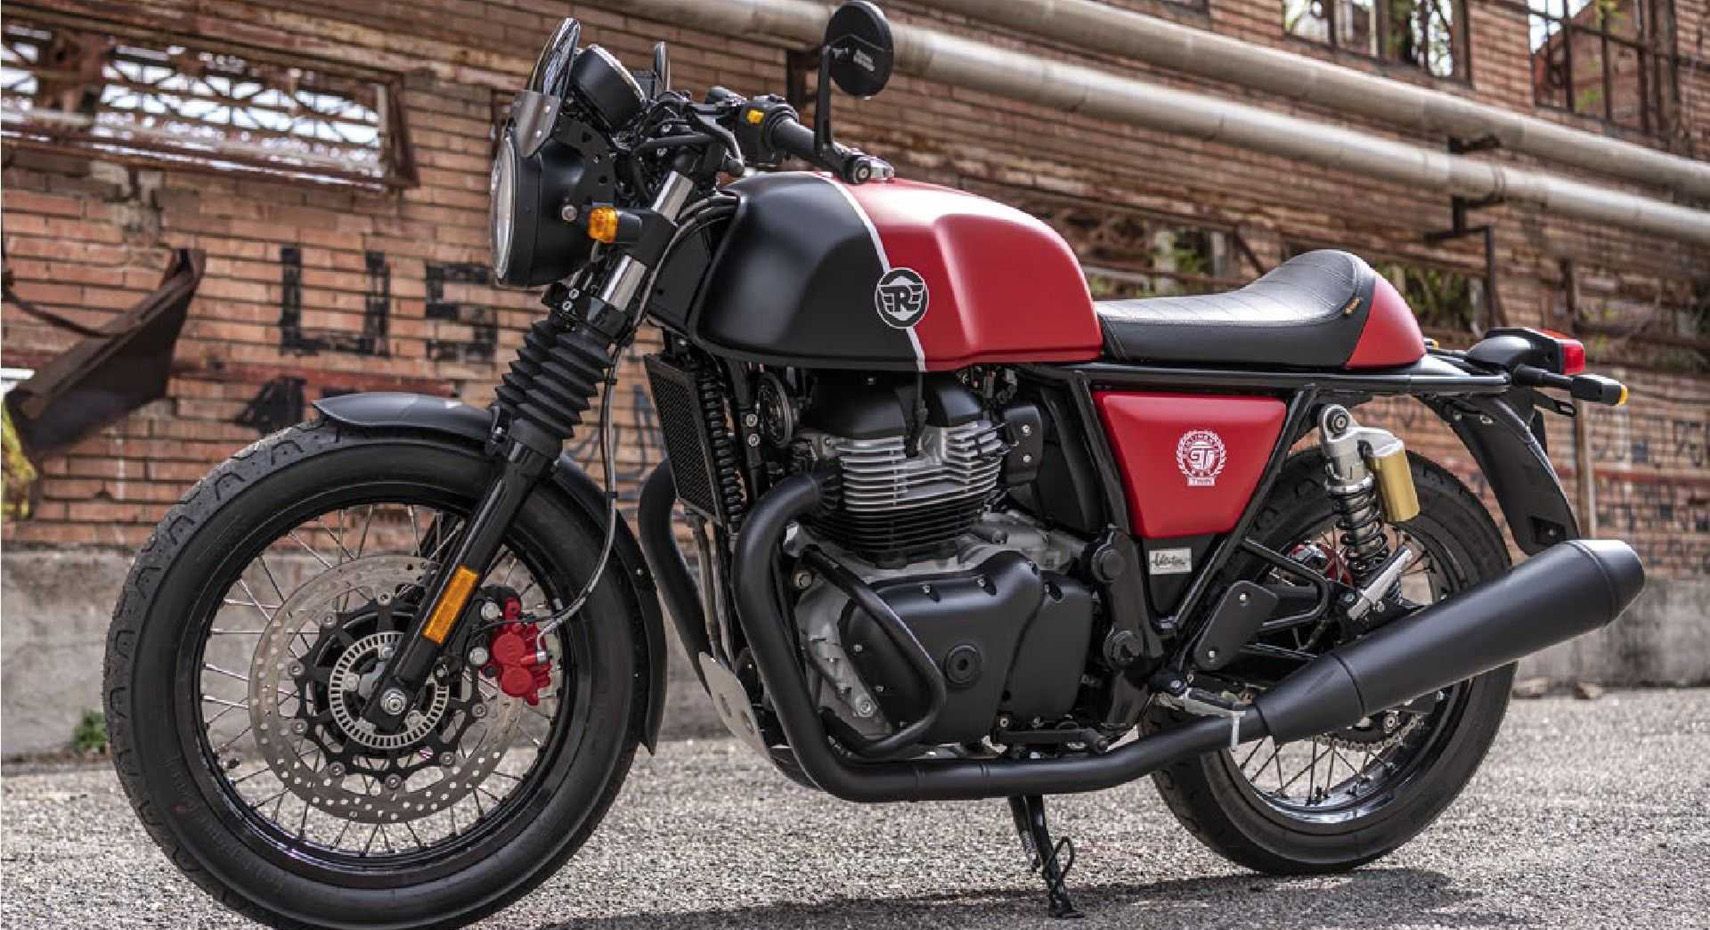 Royal Enfield Continental GT 650 Is INT650's Café-Racer Brother